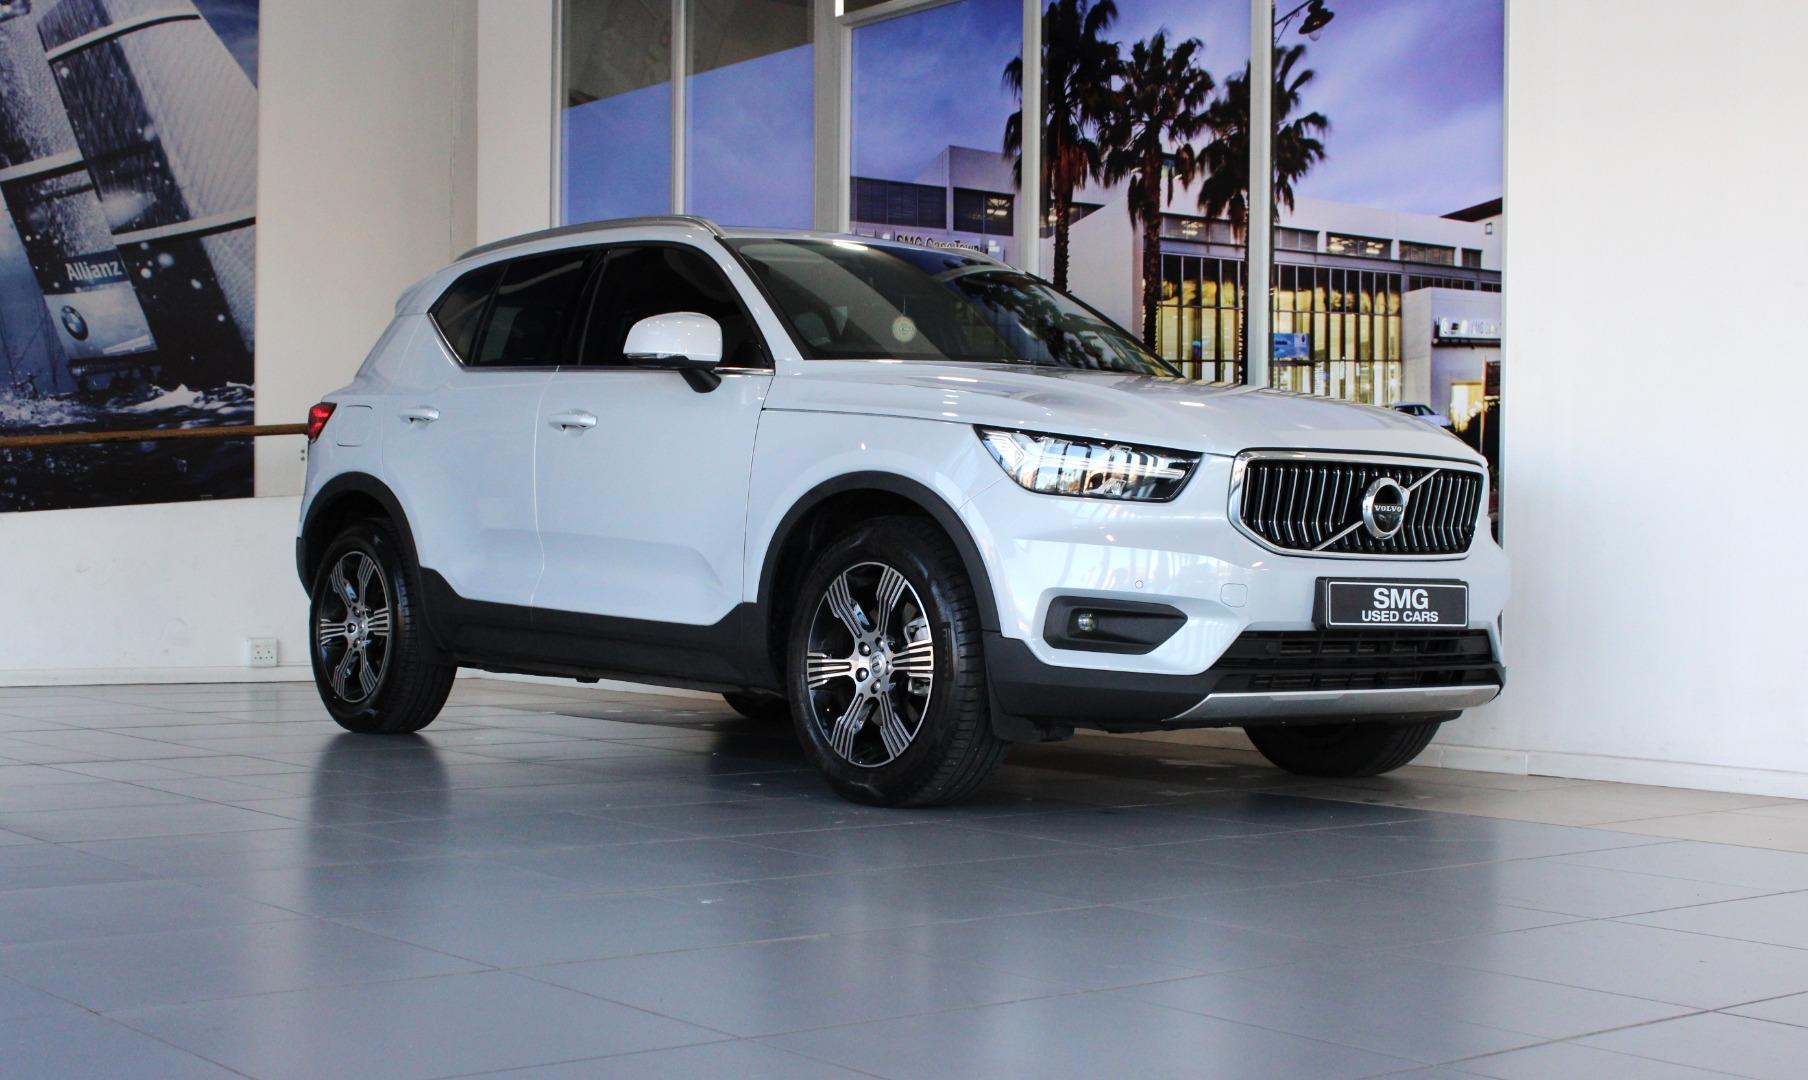 2022 Volvo XC40 T4 Inscription  for sale - SMG12|USED|115413